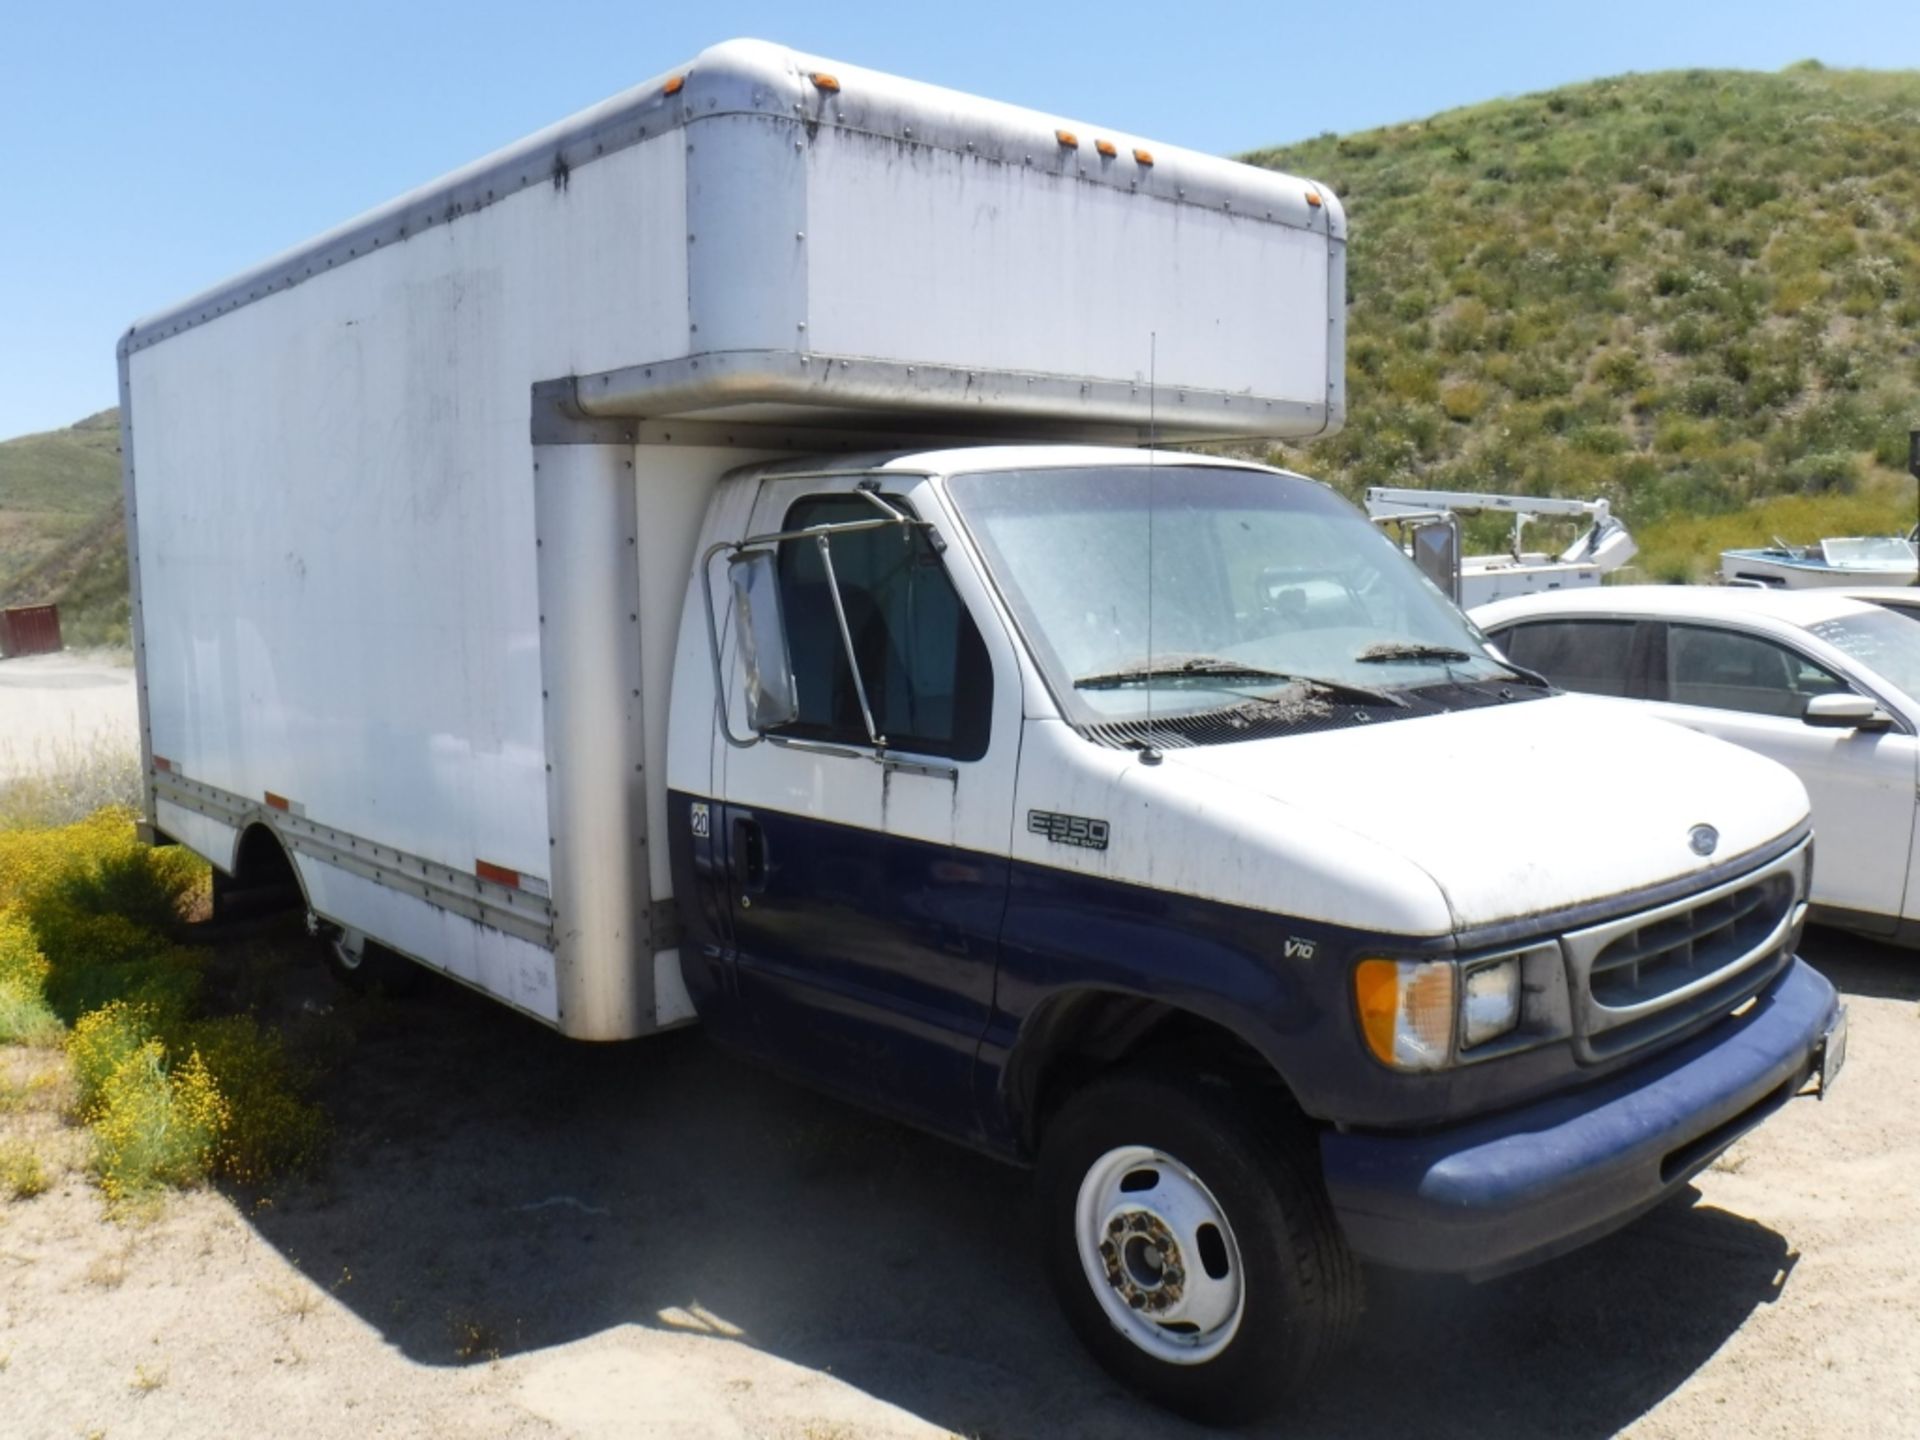 Ford E-350 Van Truck, - Image 3 of 56